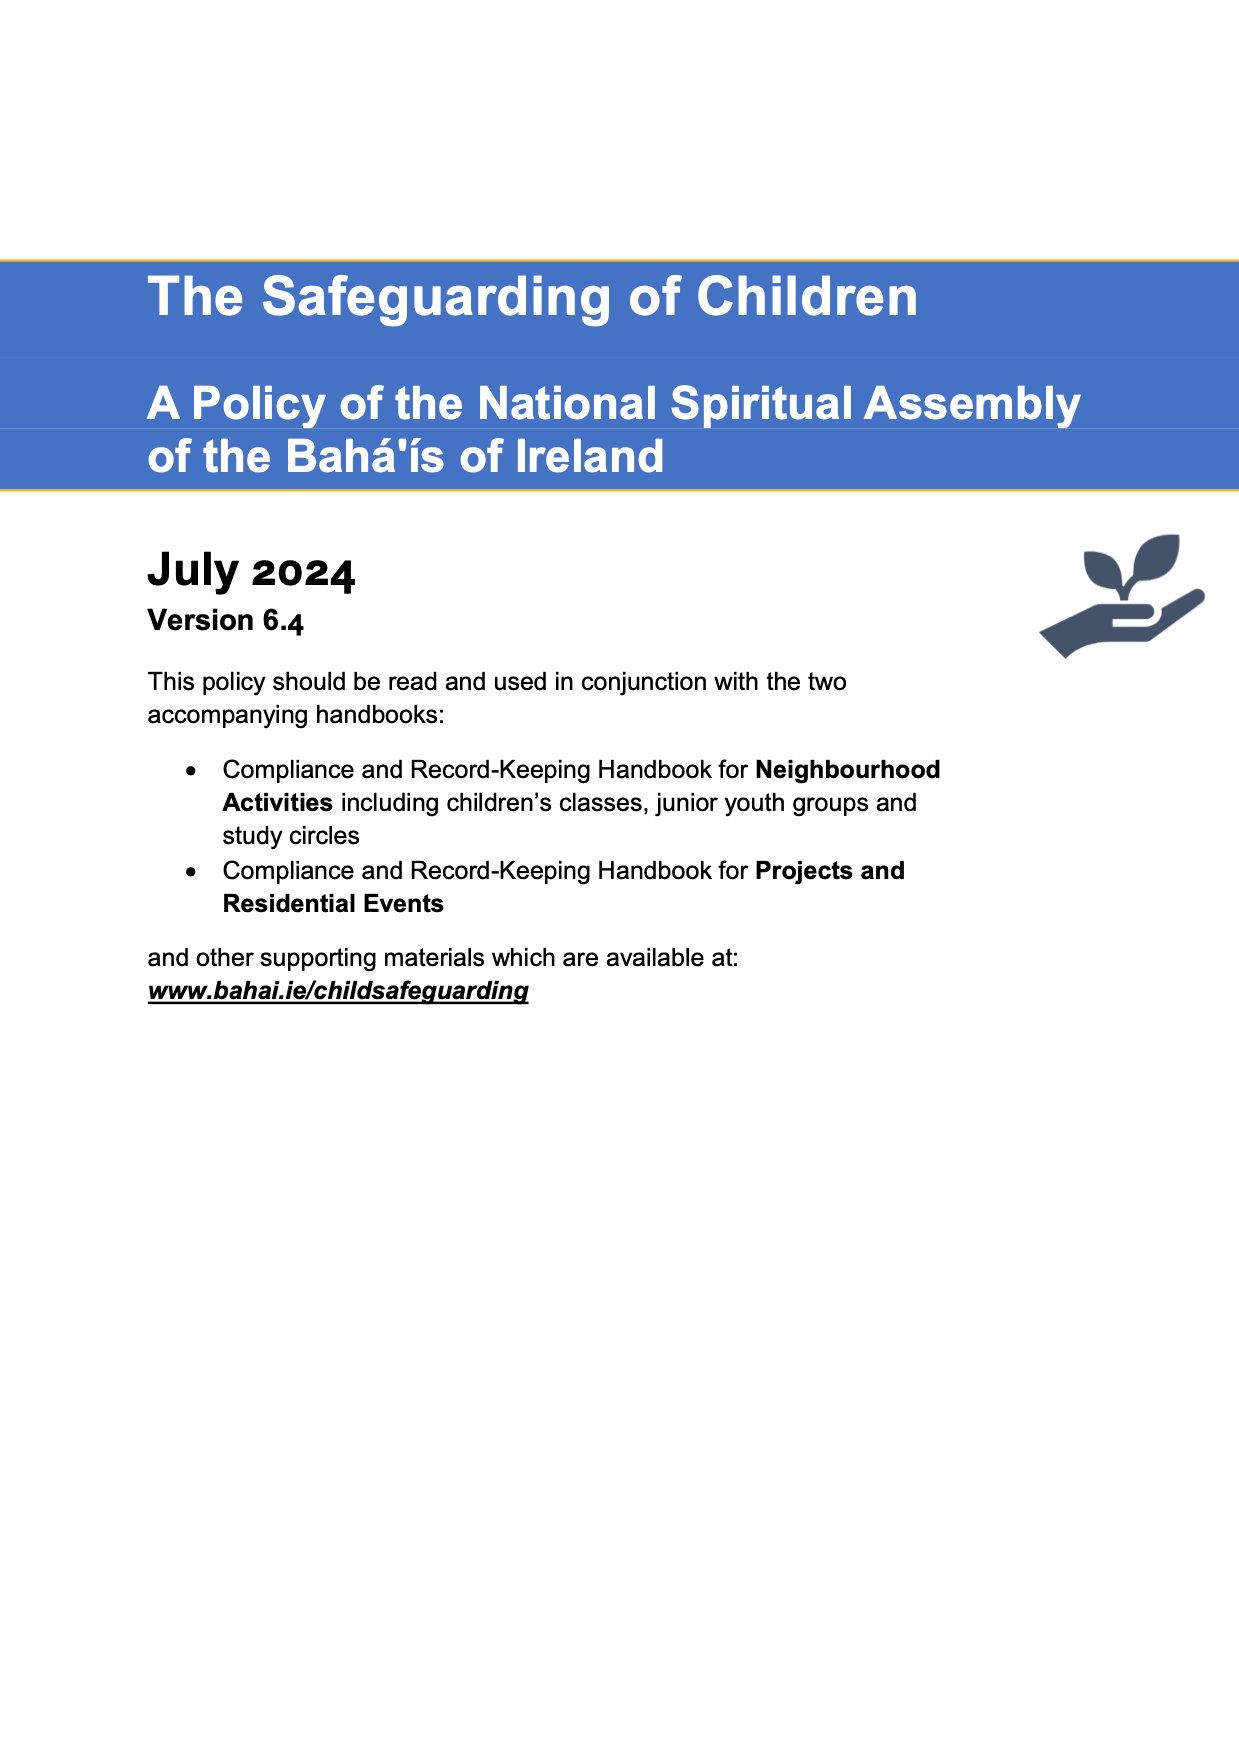 Policy for the Safeguarding of Children Version 6.4